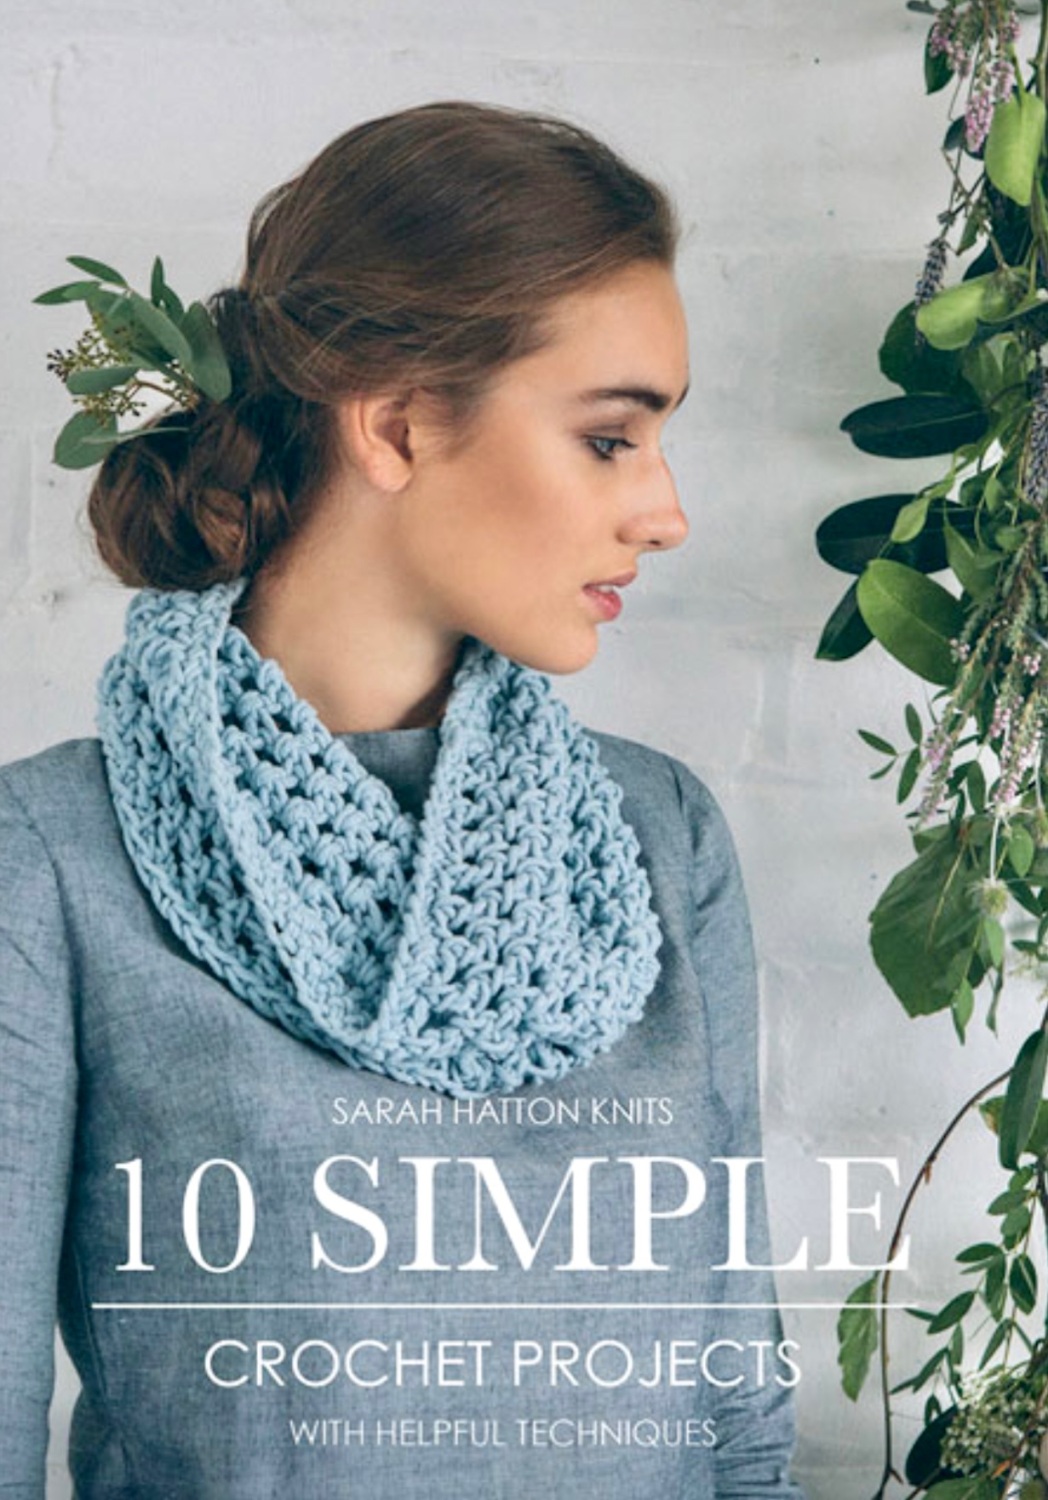 Sarah Hatton Knits 10 Simple Crochet Projects.